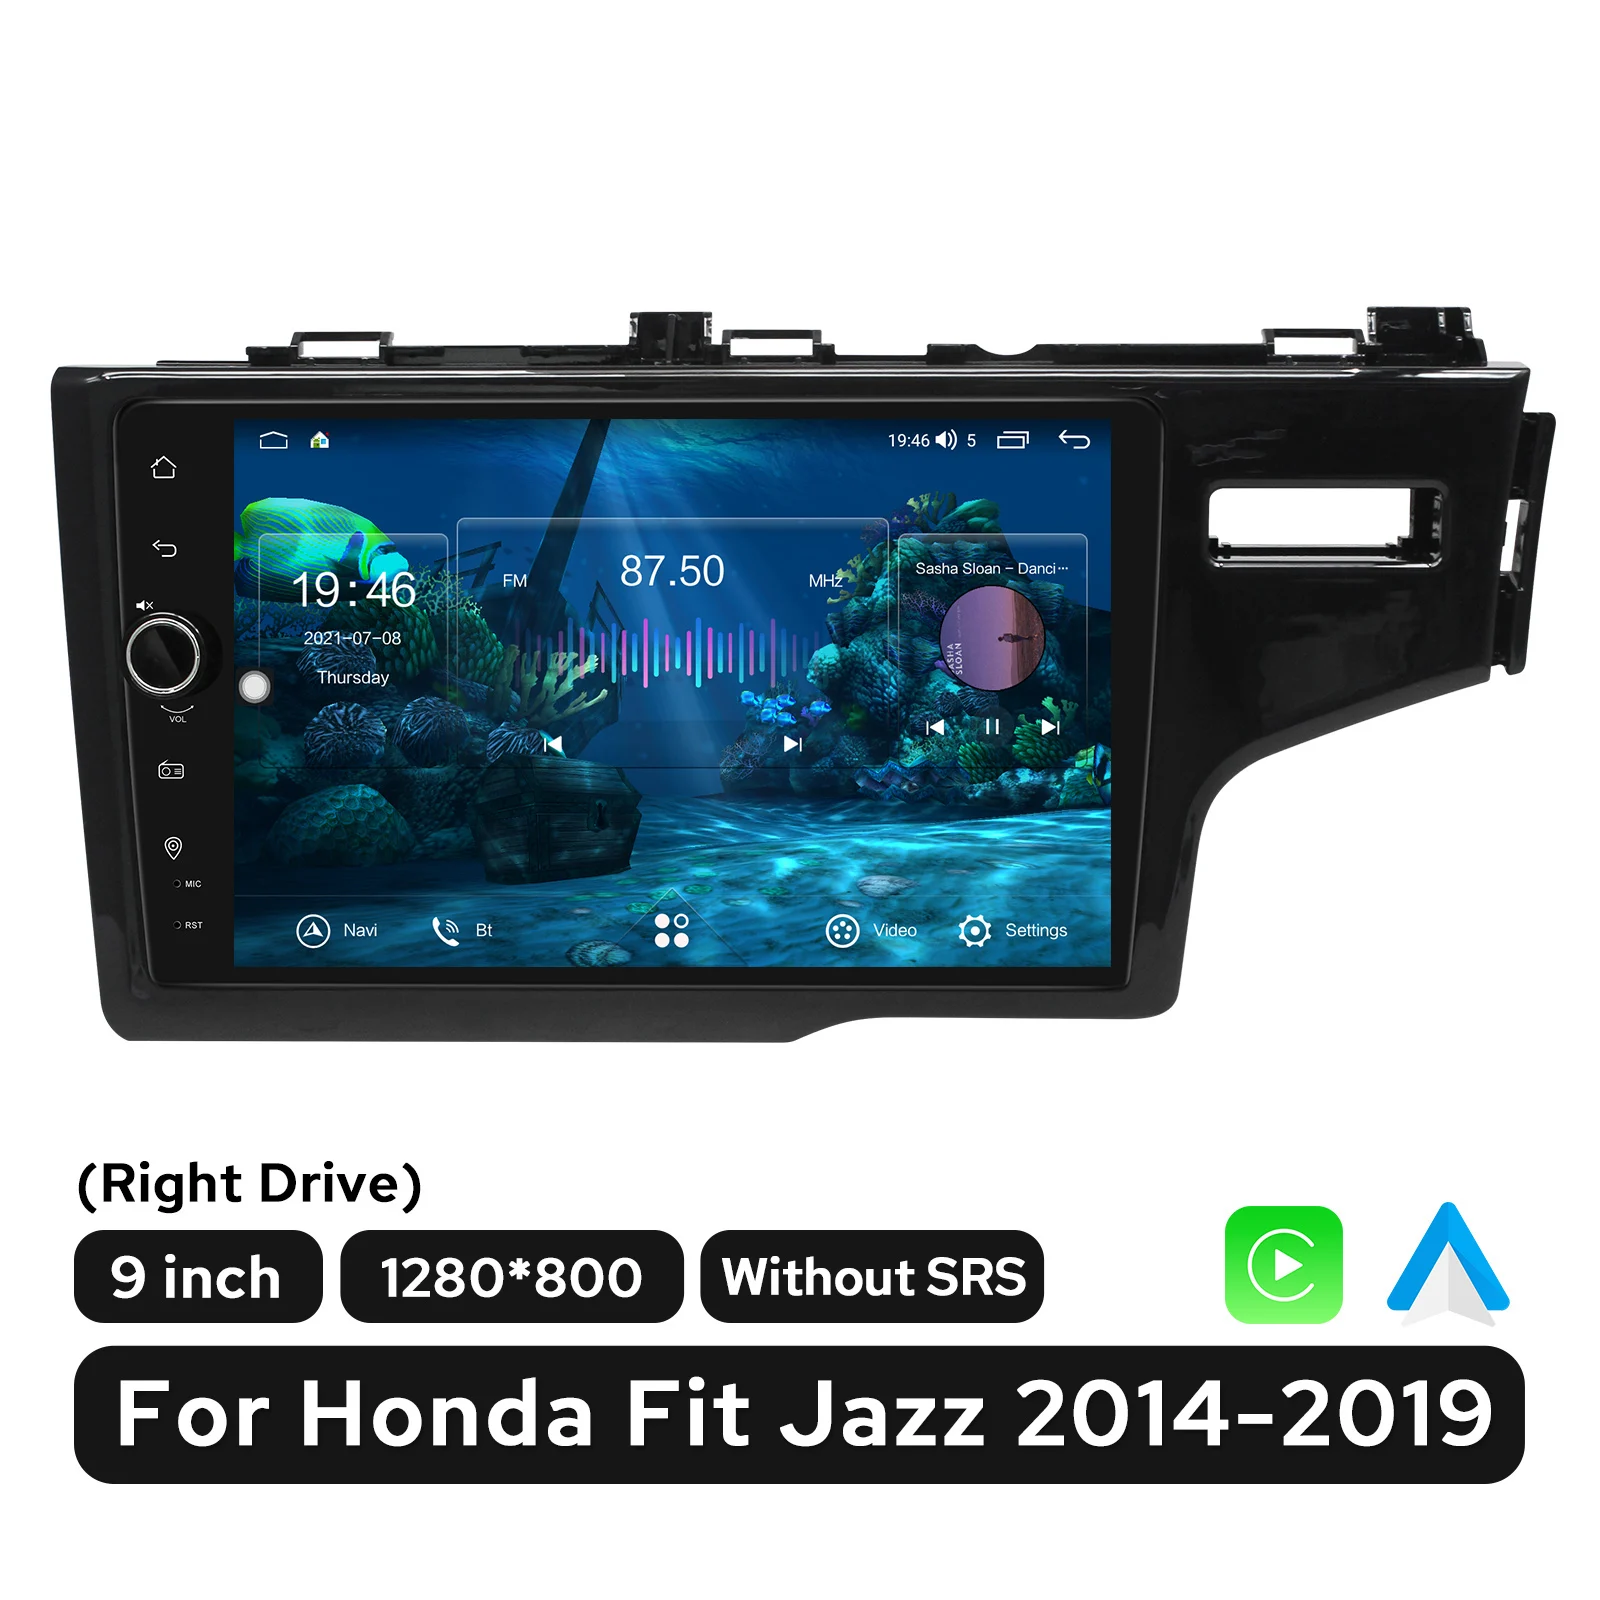 

9 Inch 1280X800 Android Car Radio Stereo Head Unit For Honda Fit Jazz 2014-2019 Multimedia Player Plug and Play Without SRS